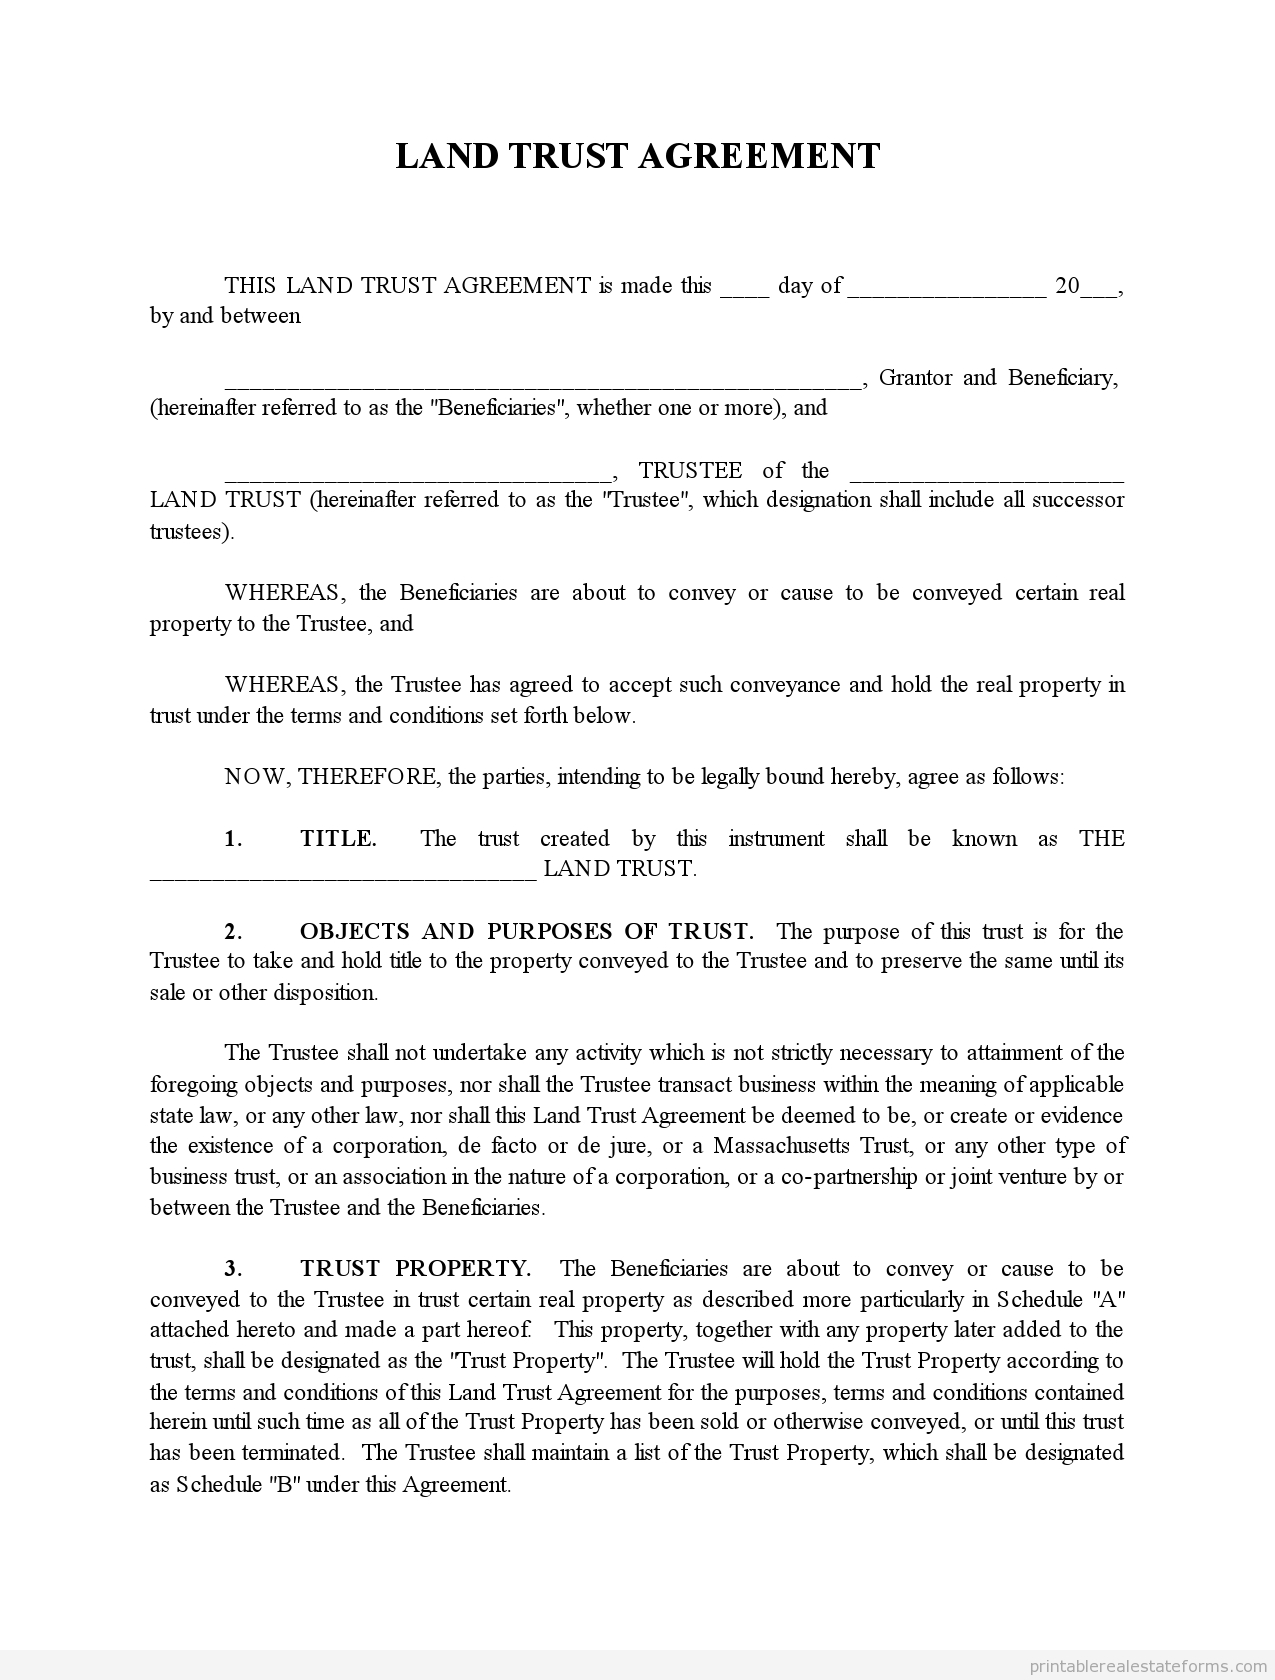 Sample Printable Land Trust Agreement Form | Printable Real Estate - Free Printable Land Contract Forms